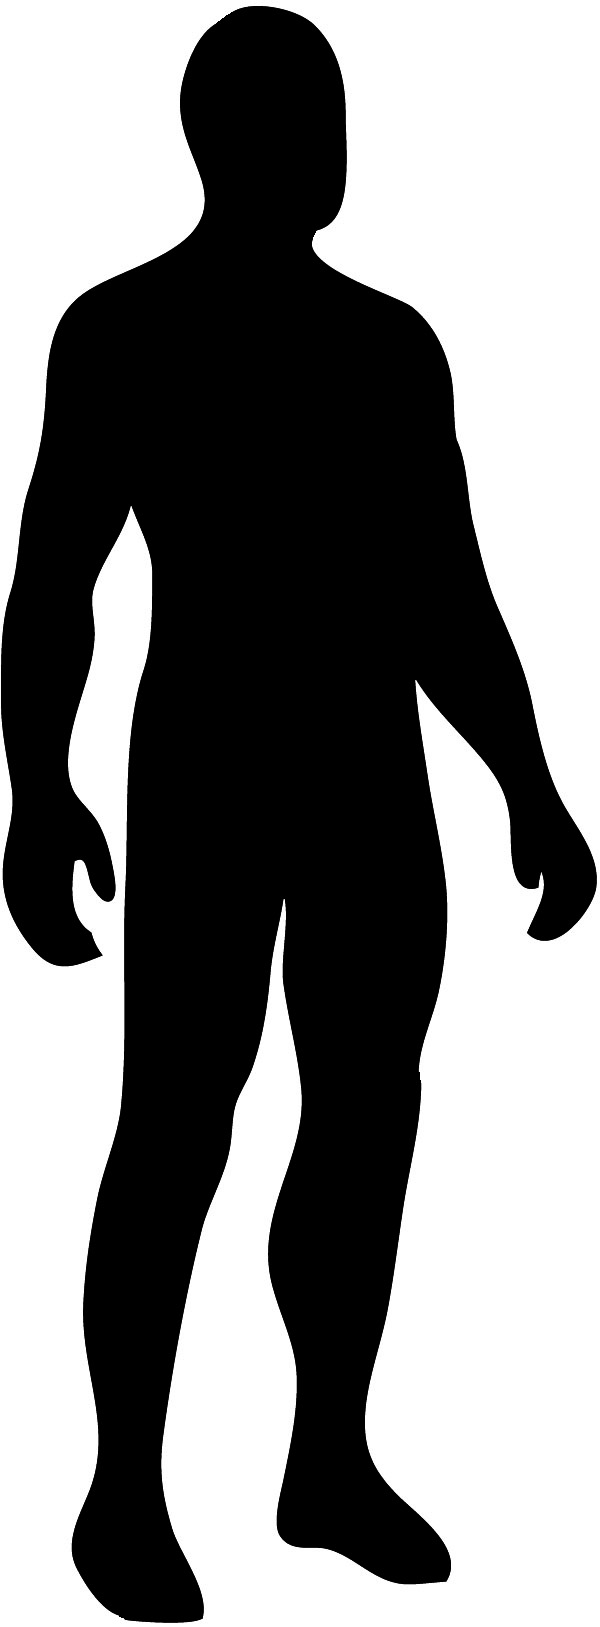 Human Body Outline Png - ClipArt Best